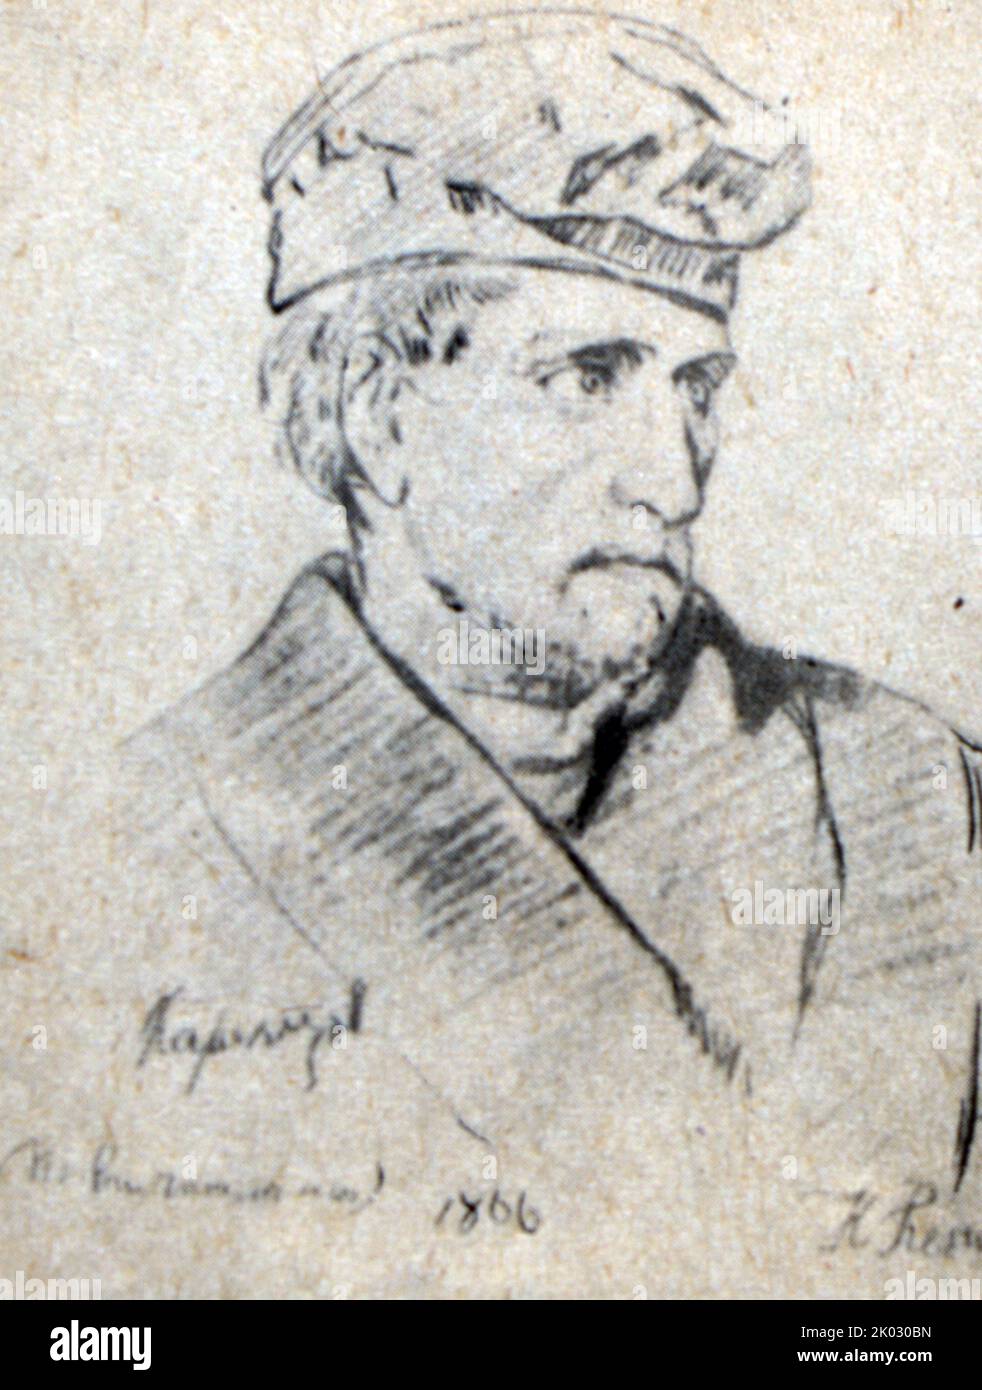 Dmitry Karakozov. Drawing from 1866. He was the first Russian revolutionary to make an attempt on the life of a tsar. The attempt to assassinate tsar Alexander II failed and Karakozov was executed. Stock Photo